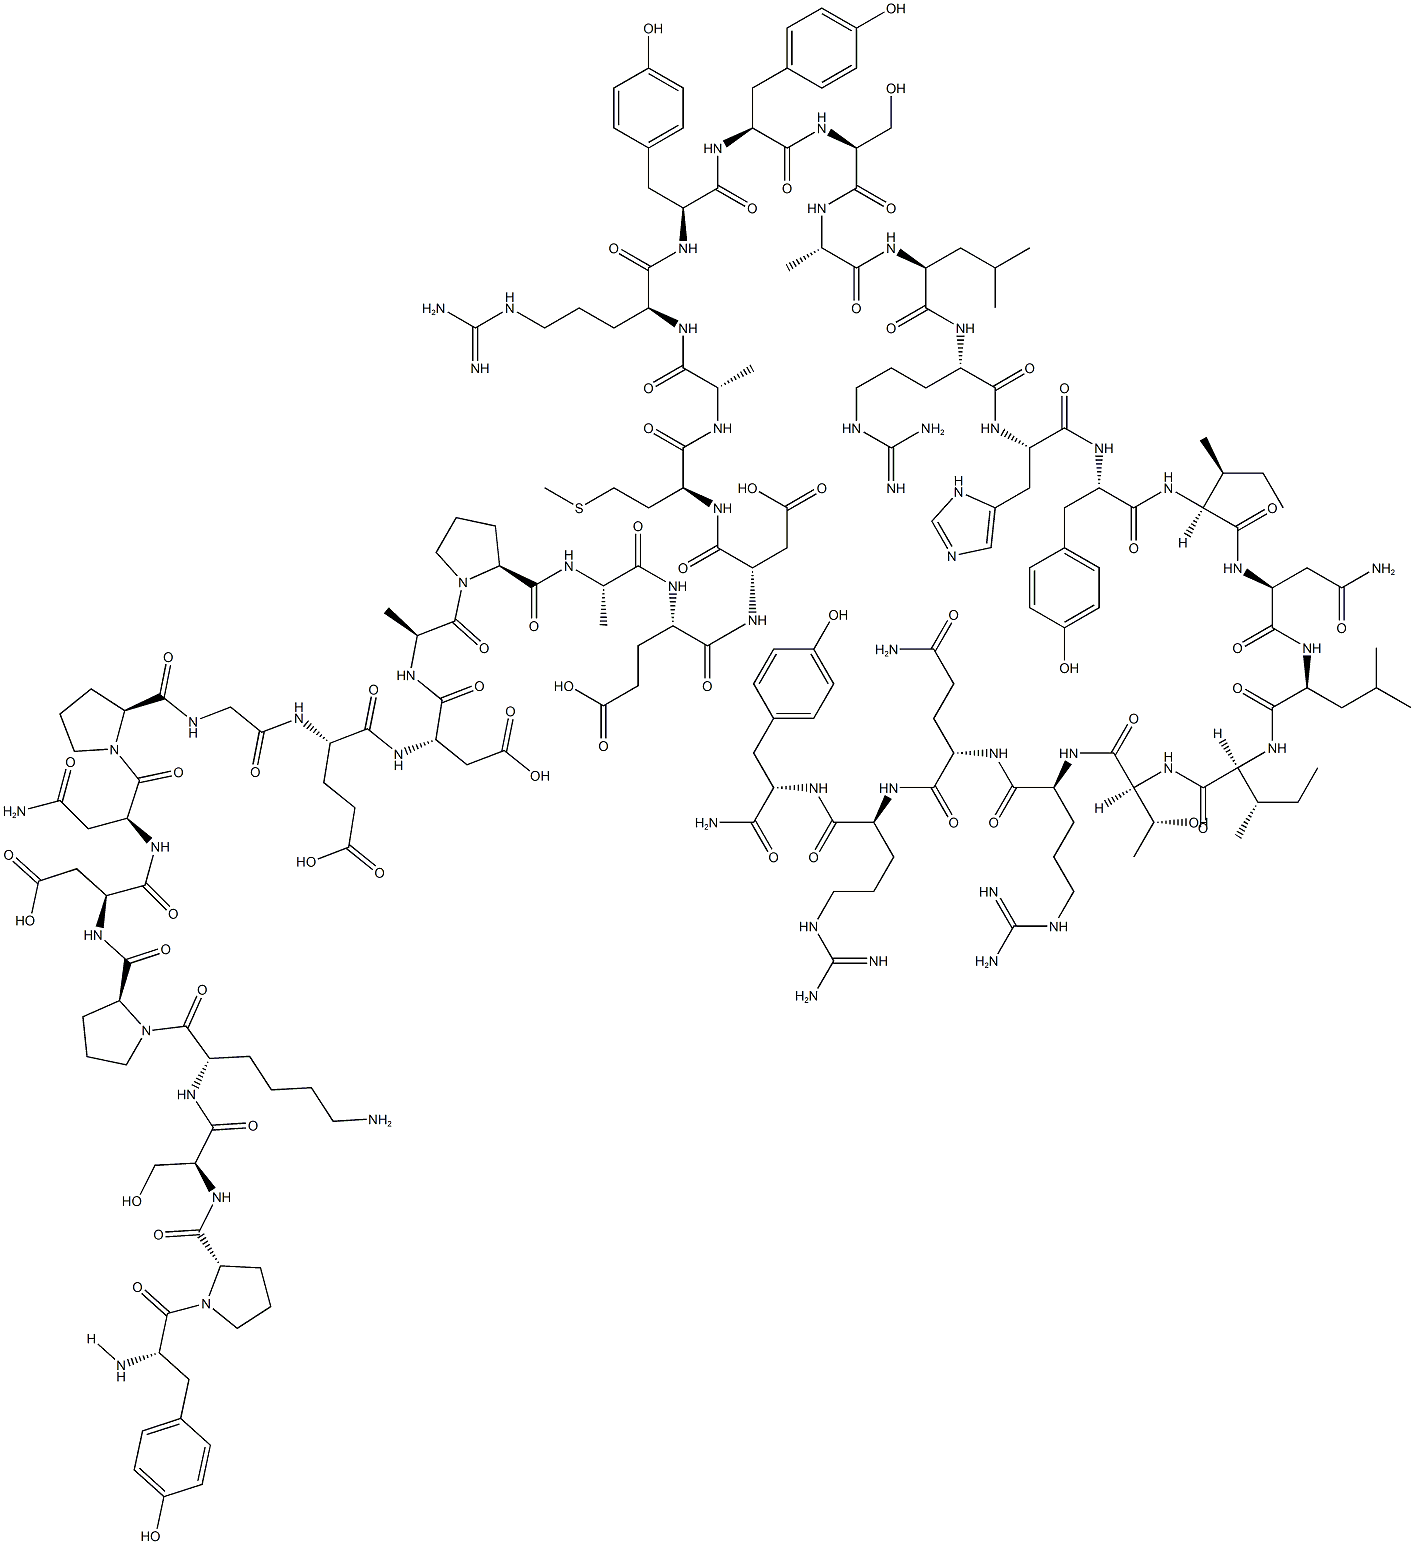 Neuropeptide Y (human, rat) Chemical Structure